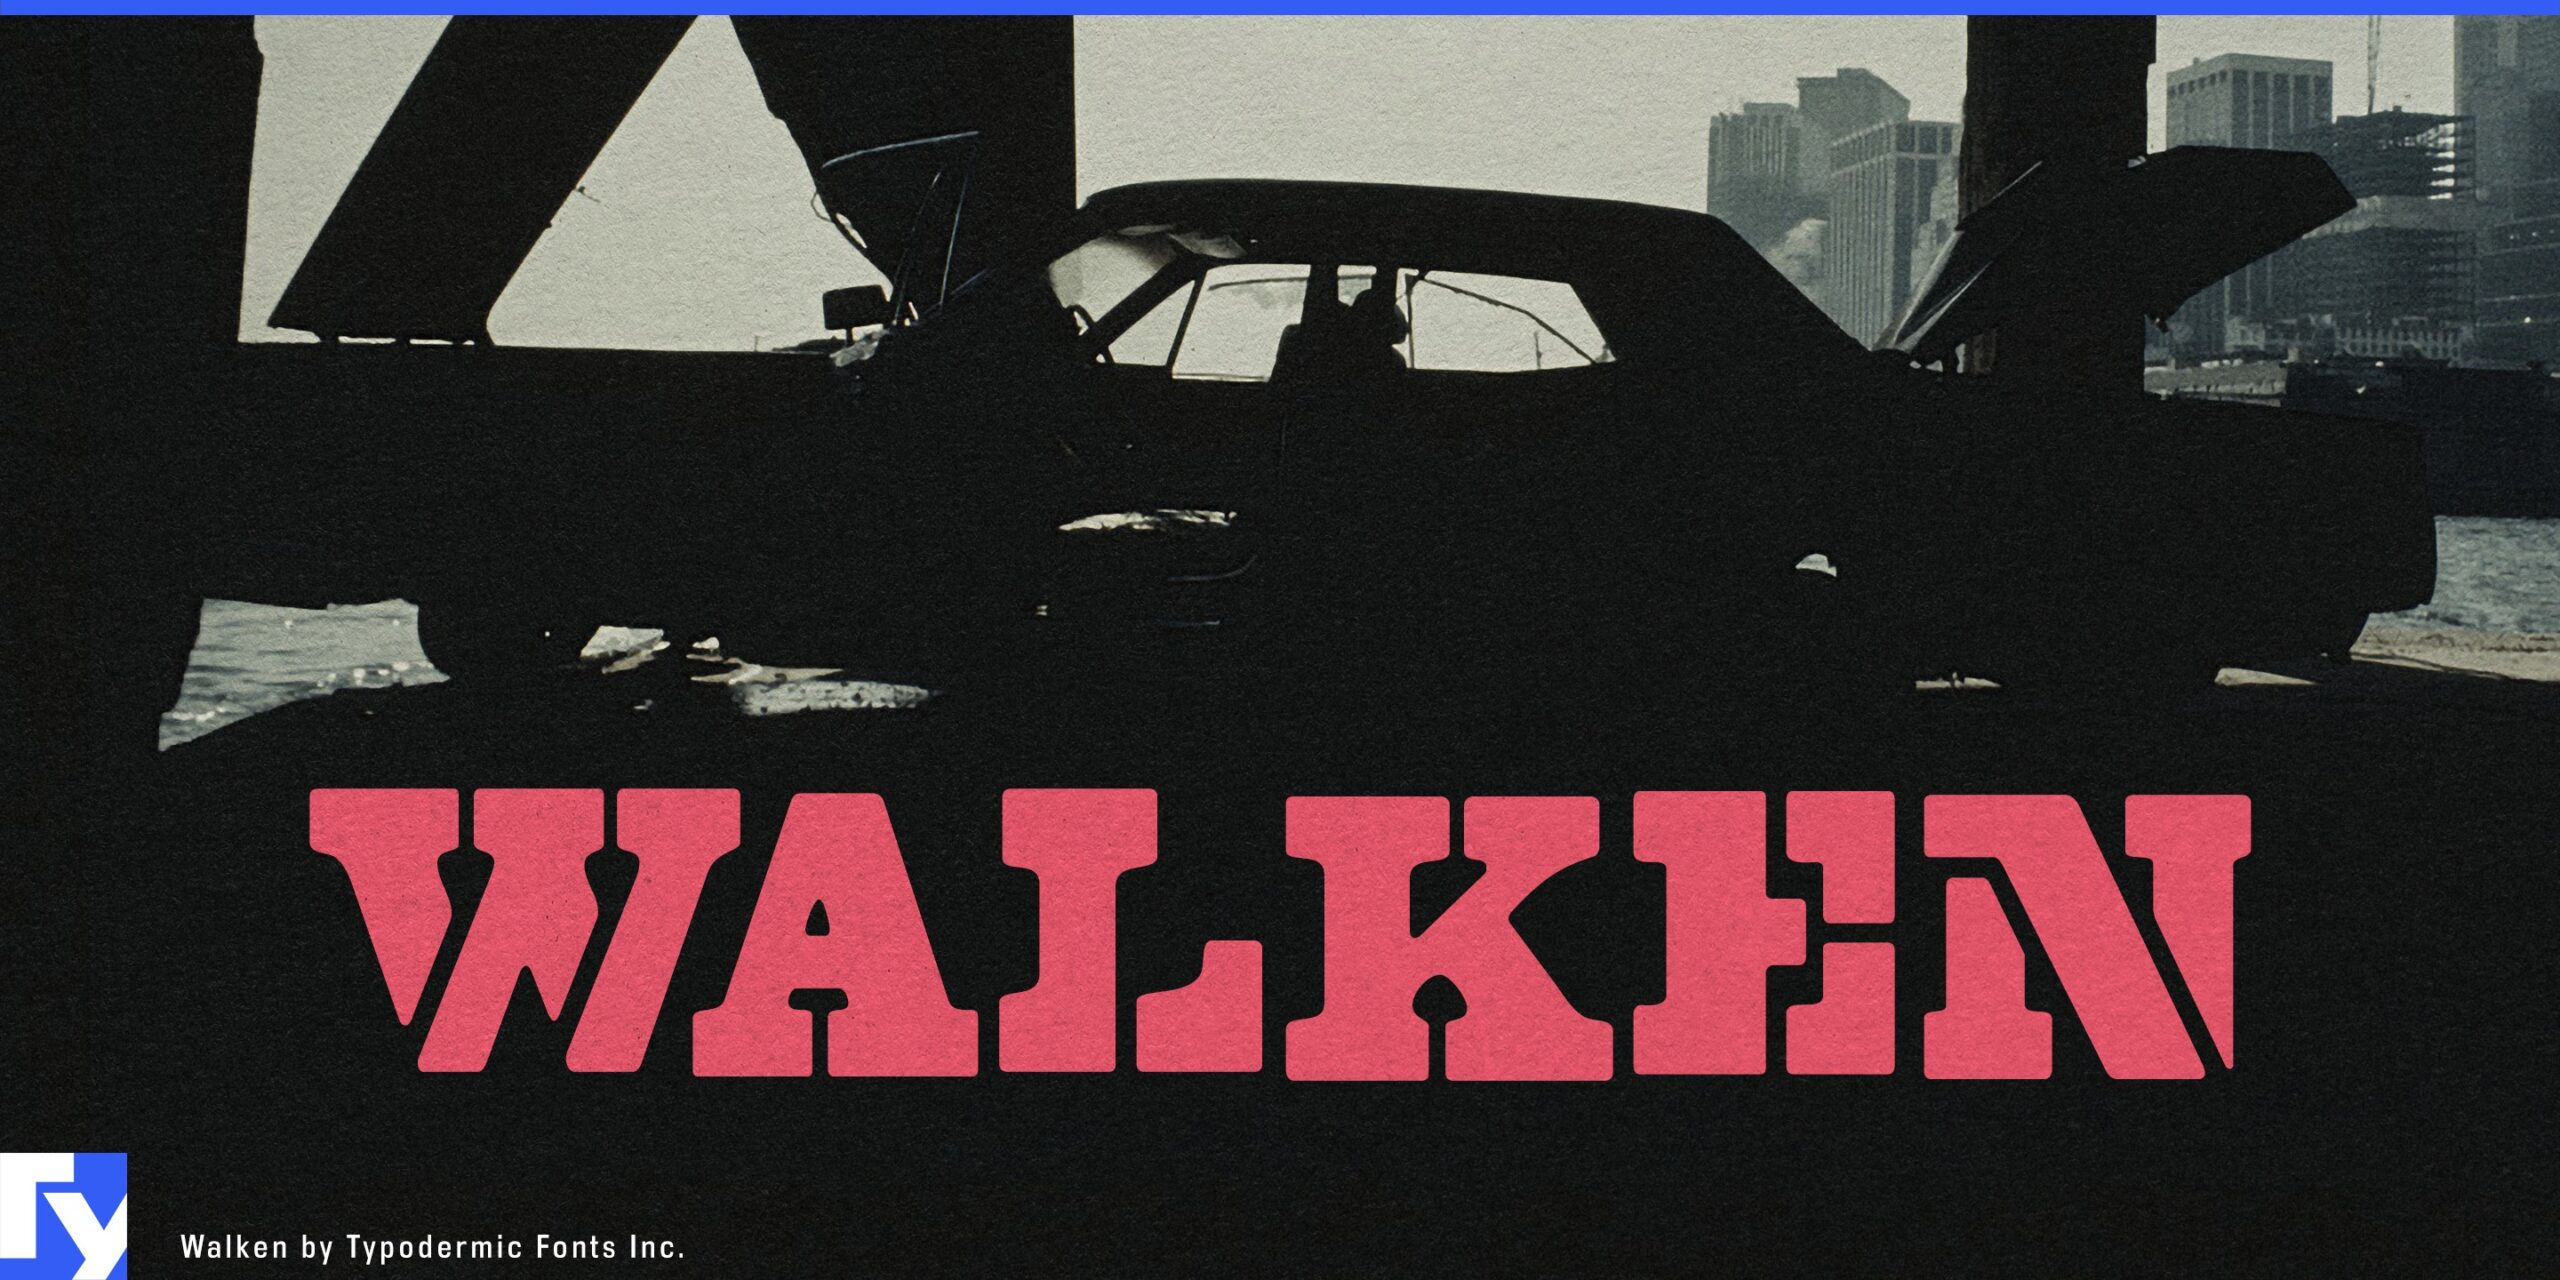 Command the Stage: Walken Typeface Sets the Tone with Authority